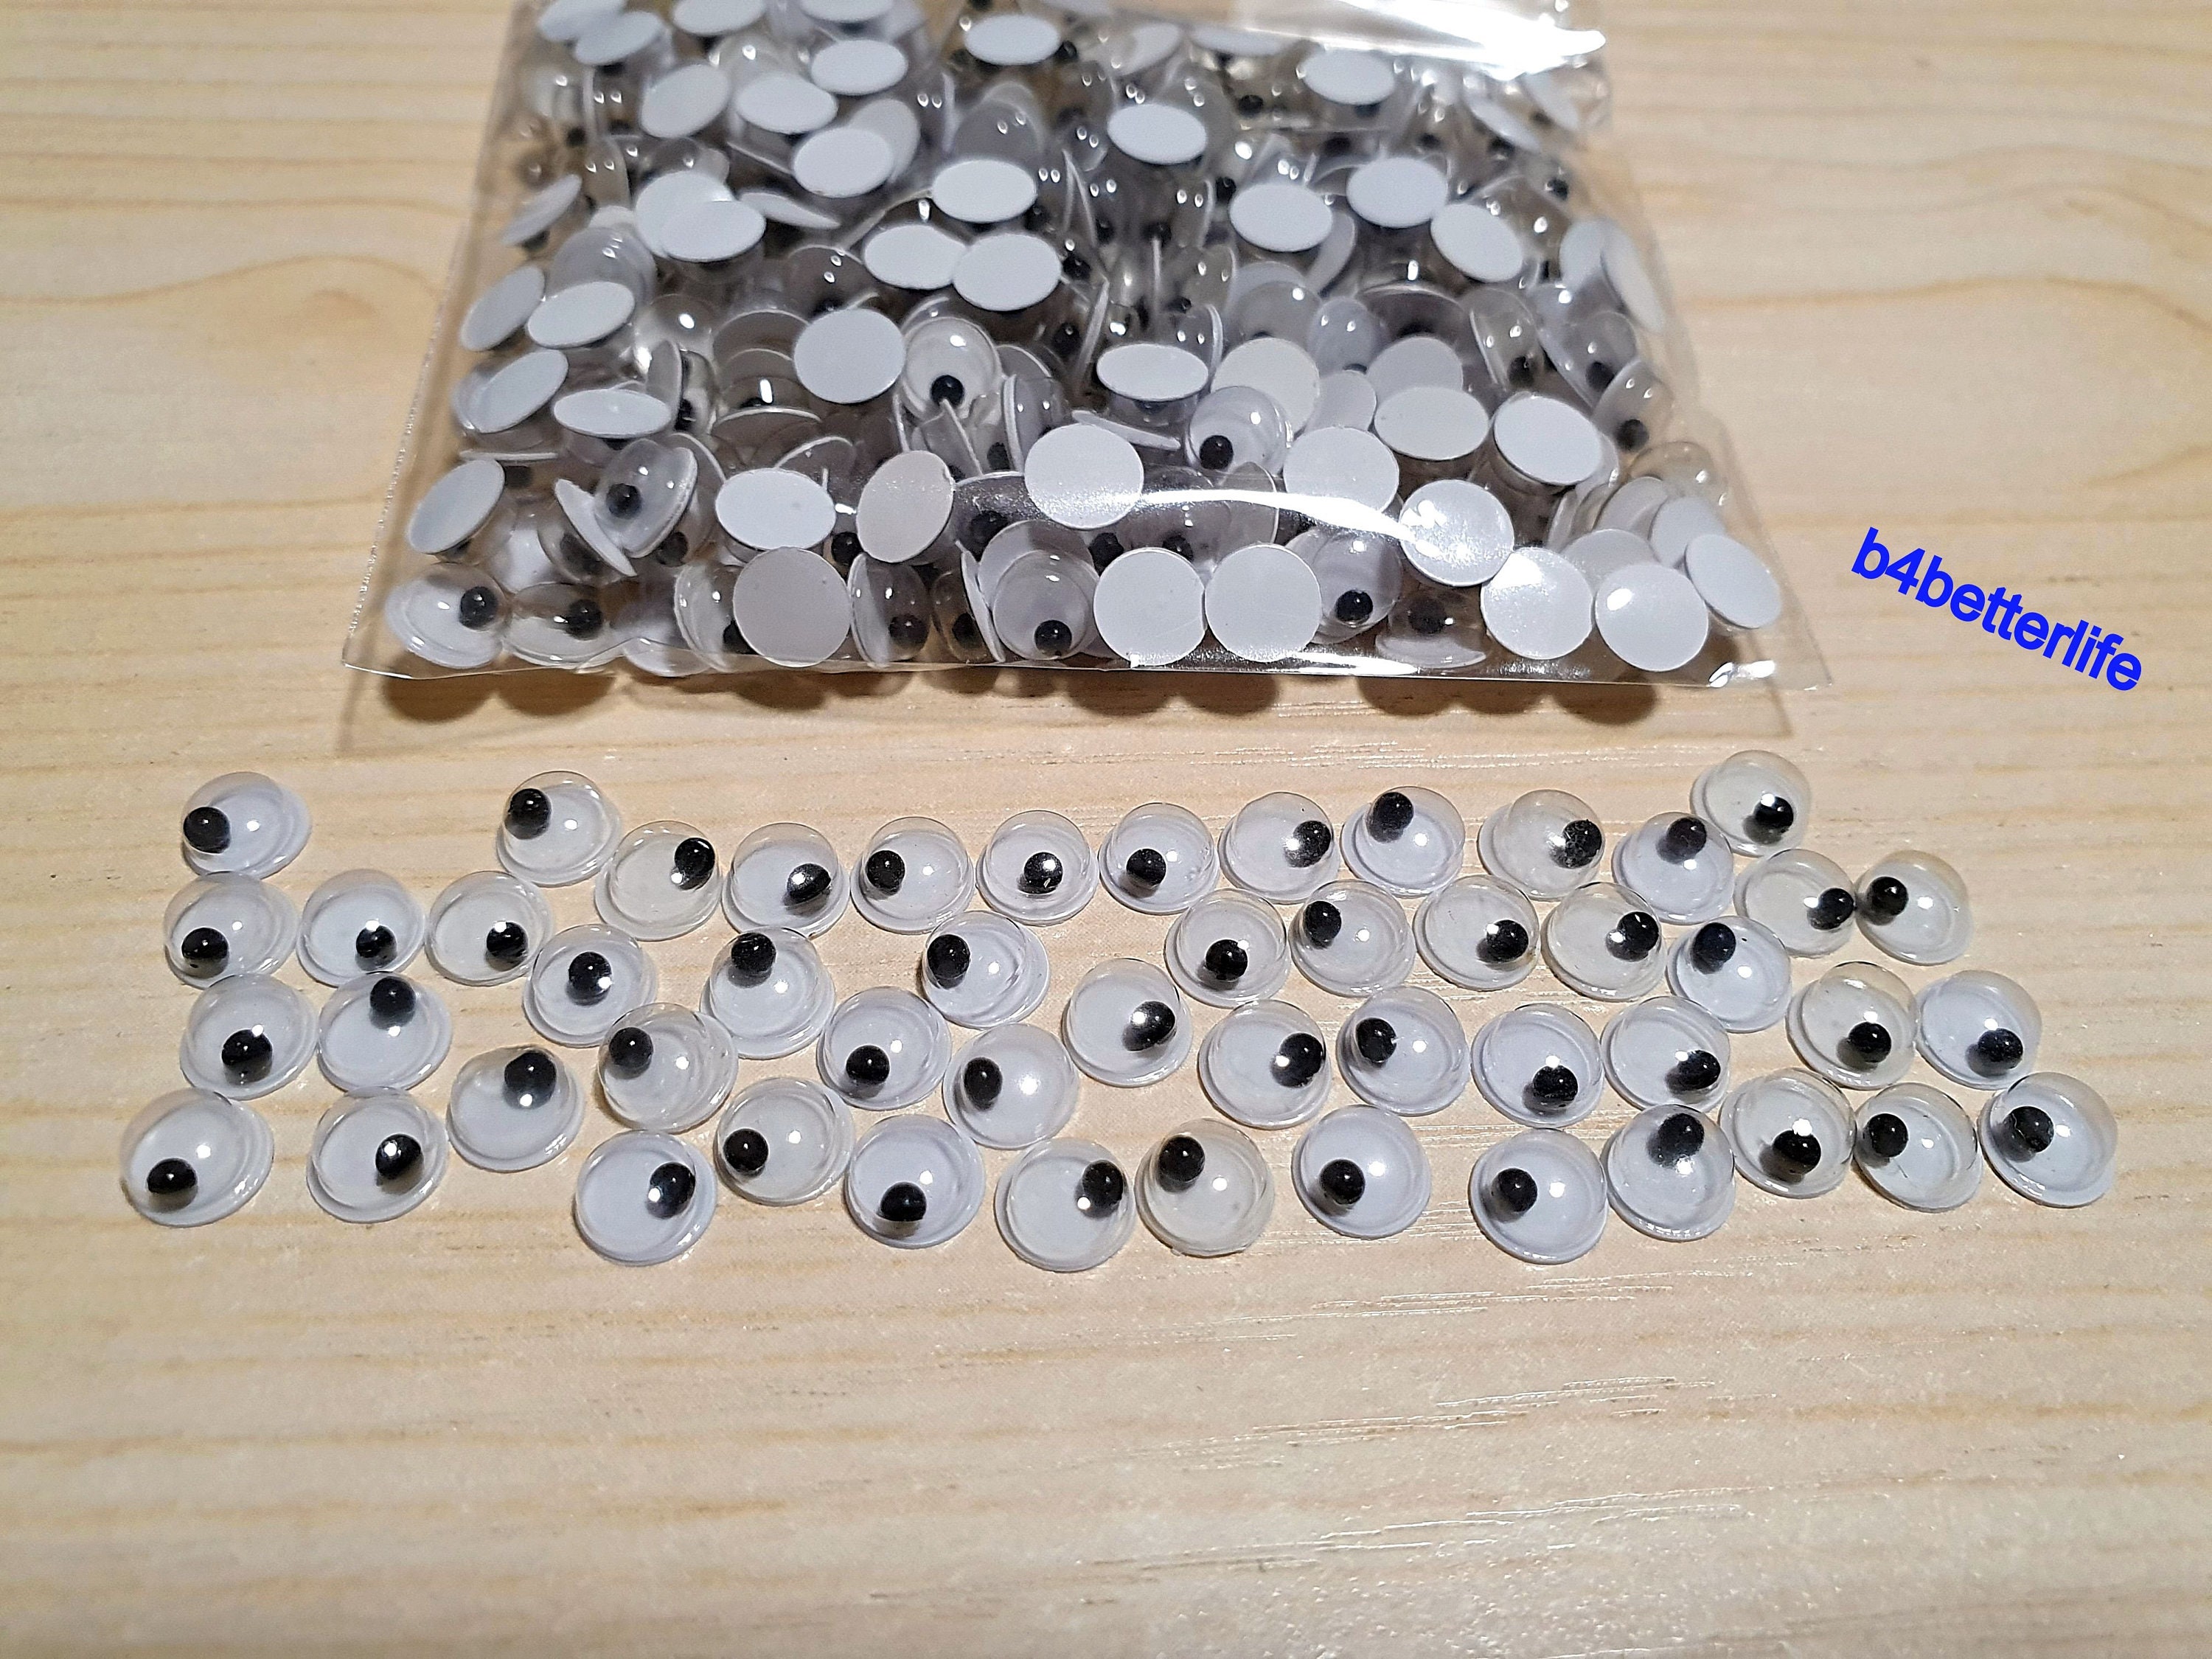 JESOT Googly Eyes for Crafts,Plastic, 700 PCS Craft Eyes with Seven  Different Sizes ,Made of High Quality Plastic ,Perfect for DIY